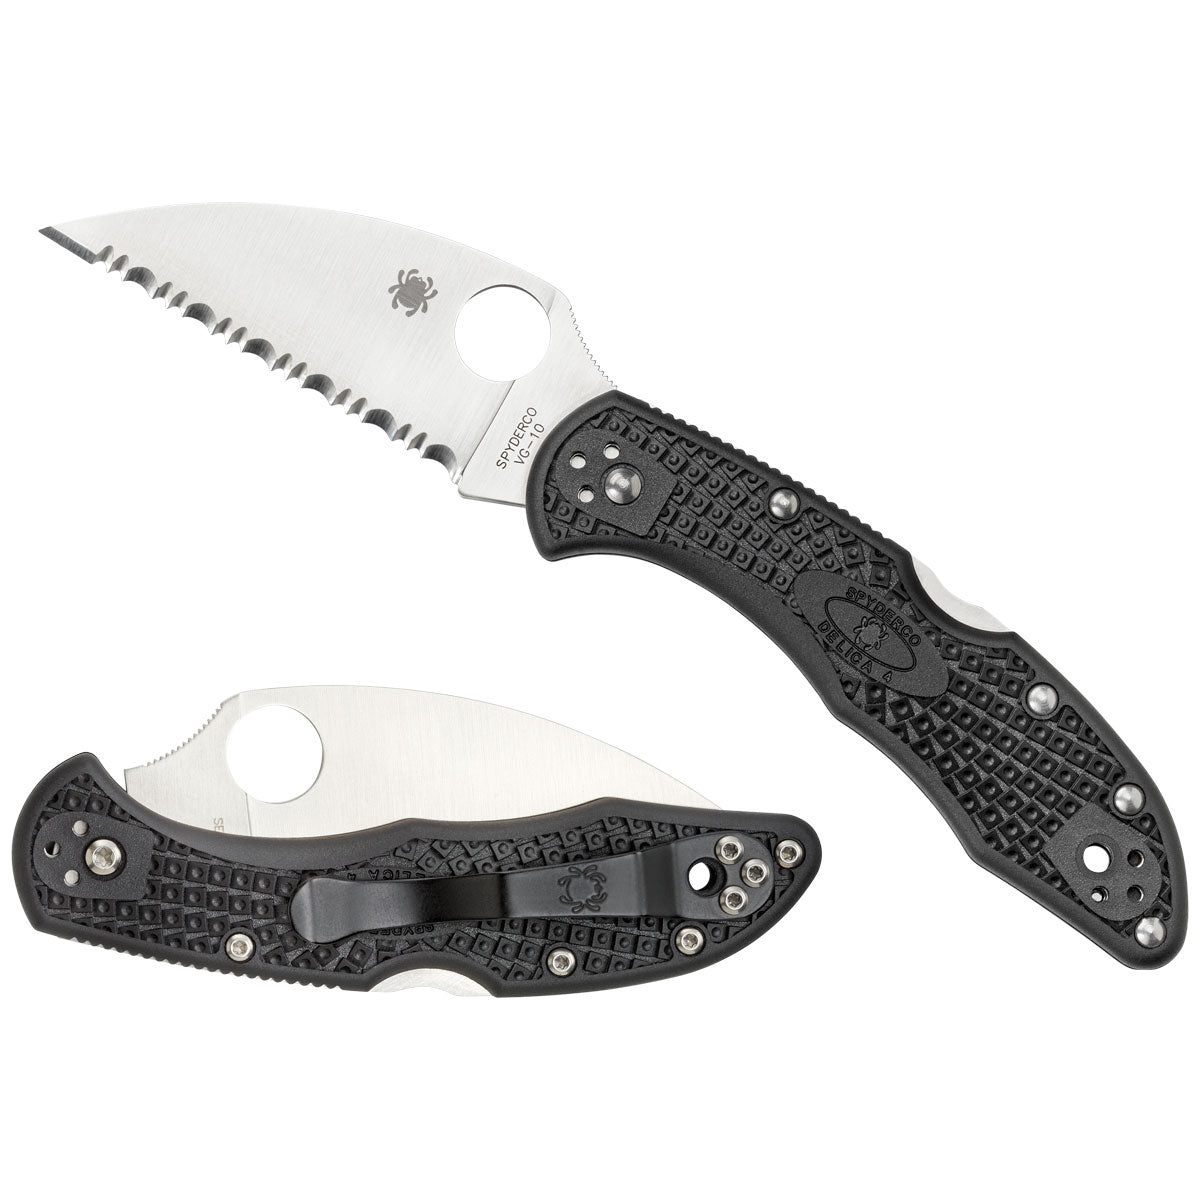 Spyderco | Delica 4 Knife Flat Ground Wharncliffe Black Handle